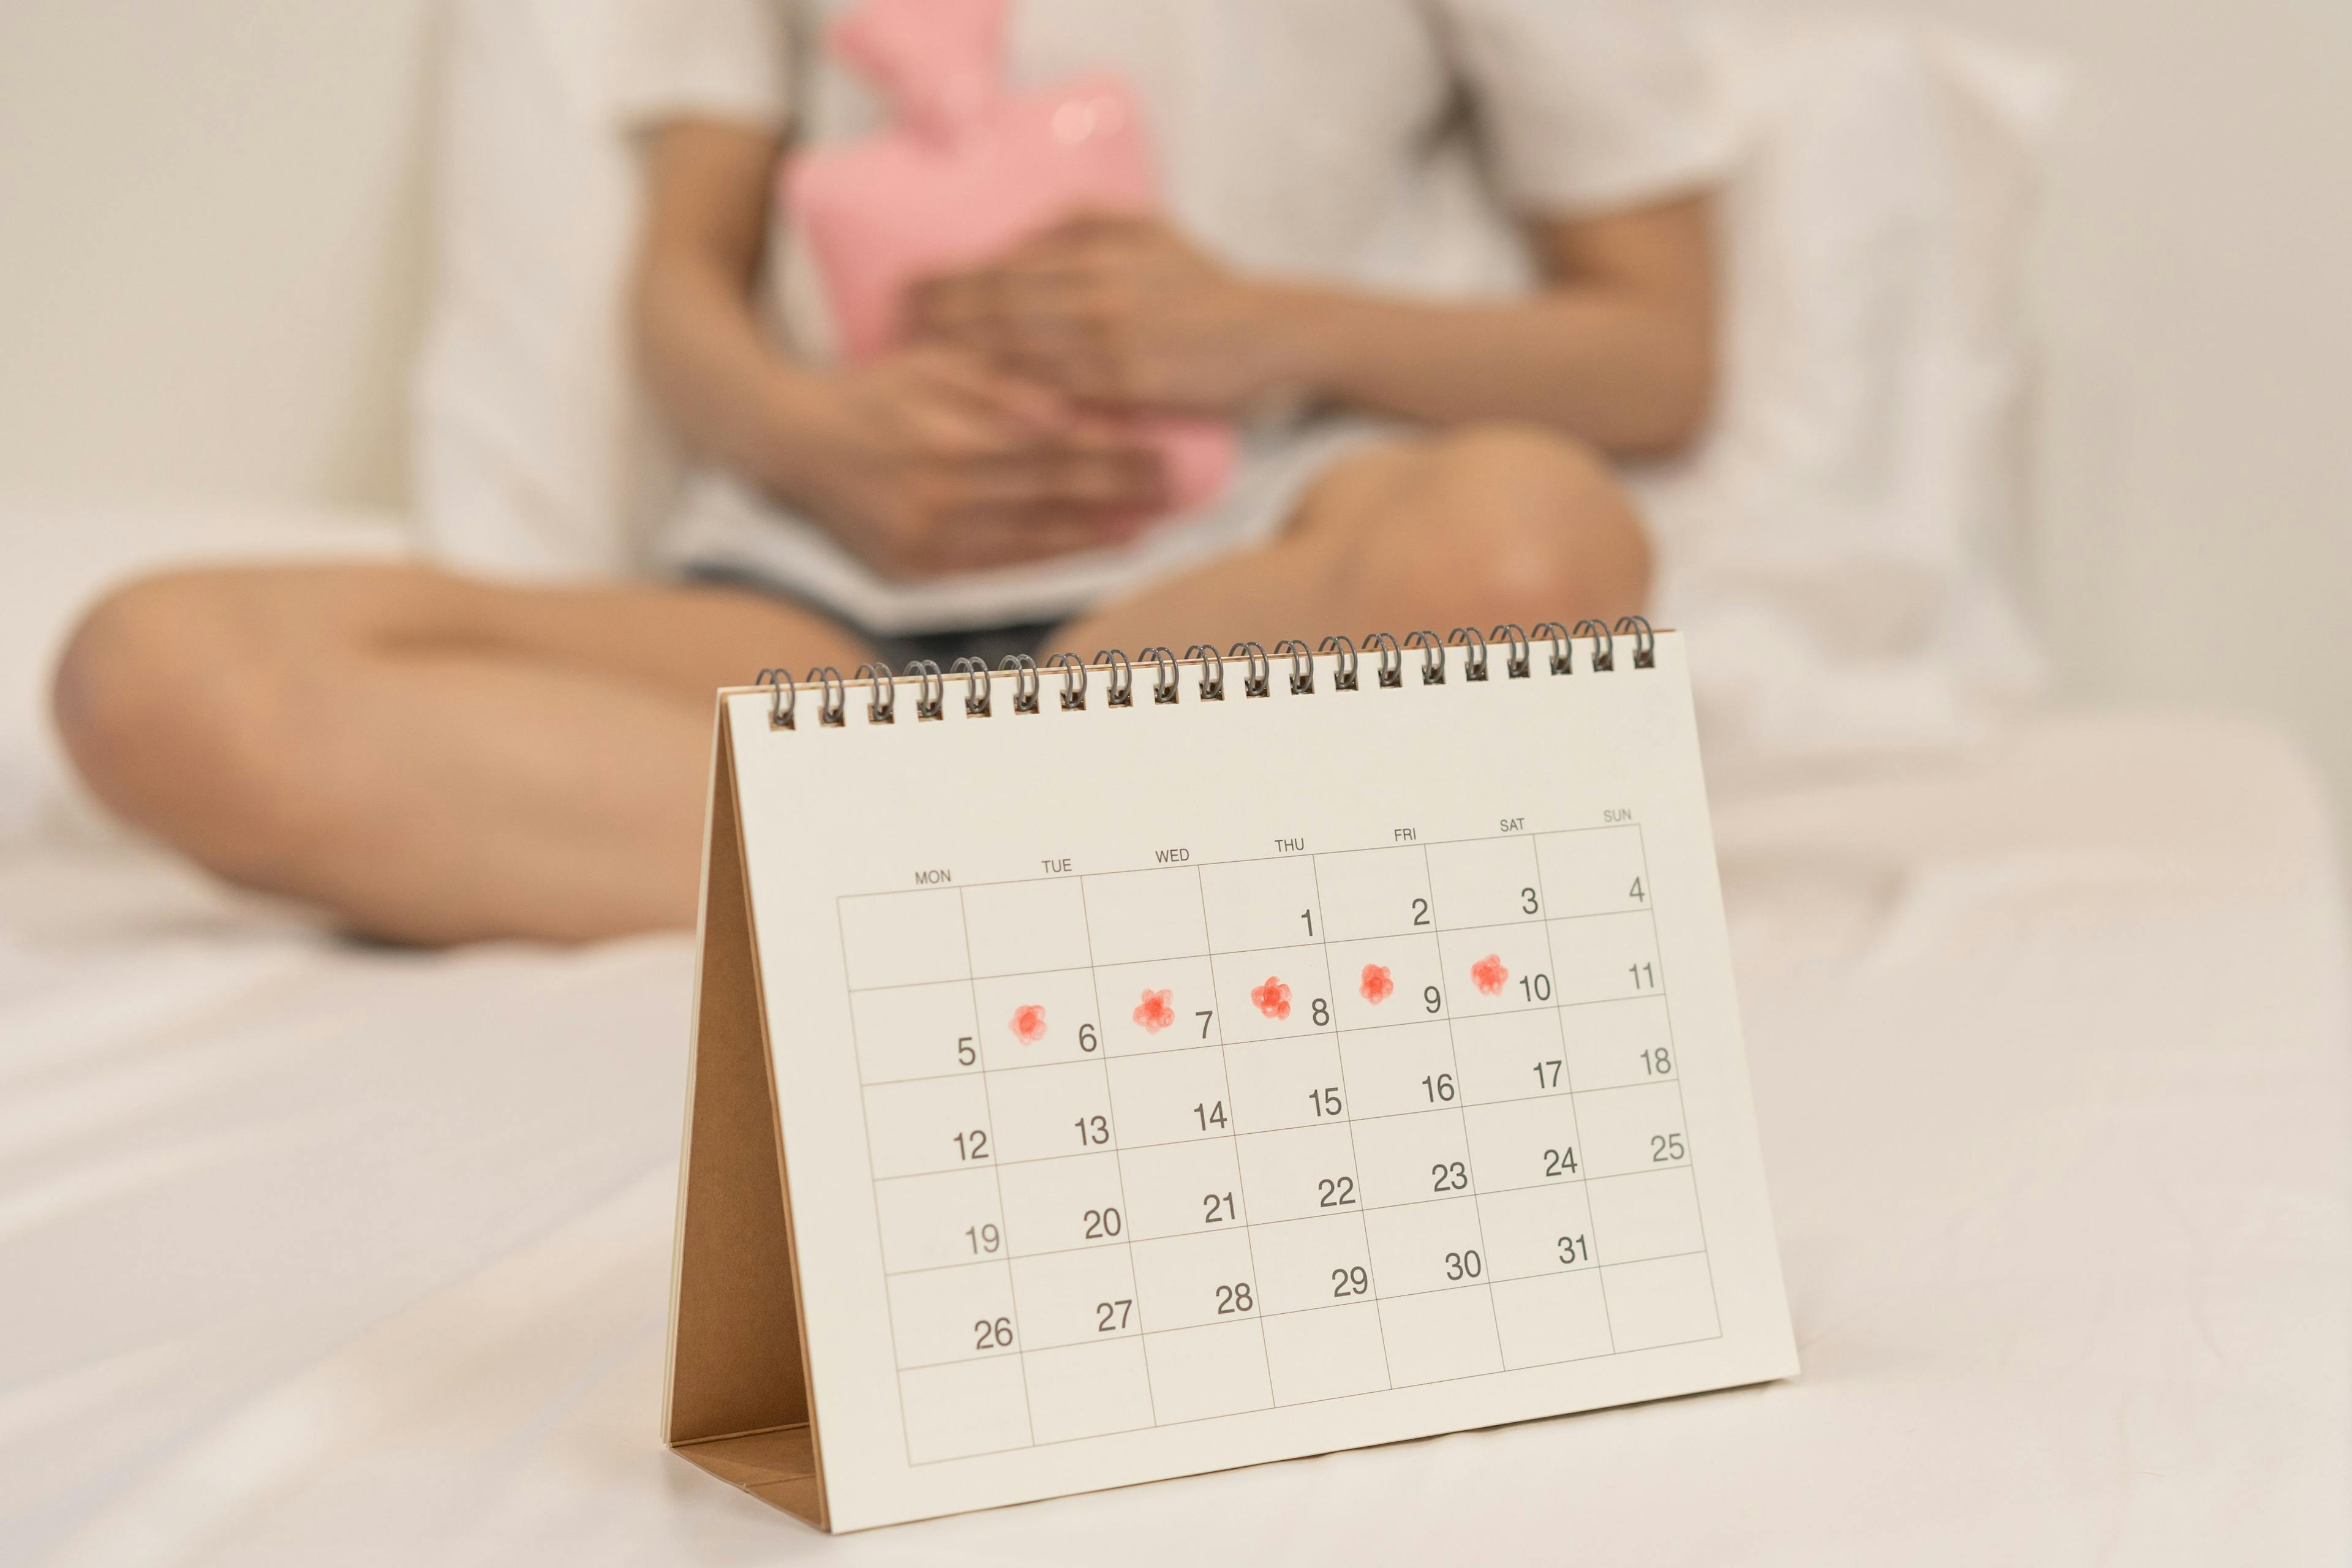 Menstrual cycle health does not vary from tracking app use | Image Credit: © KMPZZZ - © KMPZZZ - stock.adobe.com.